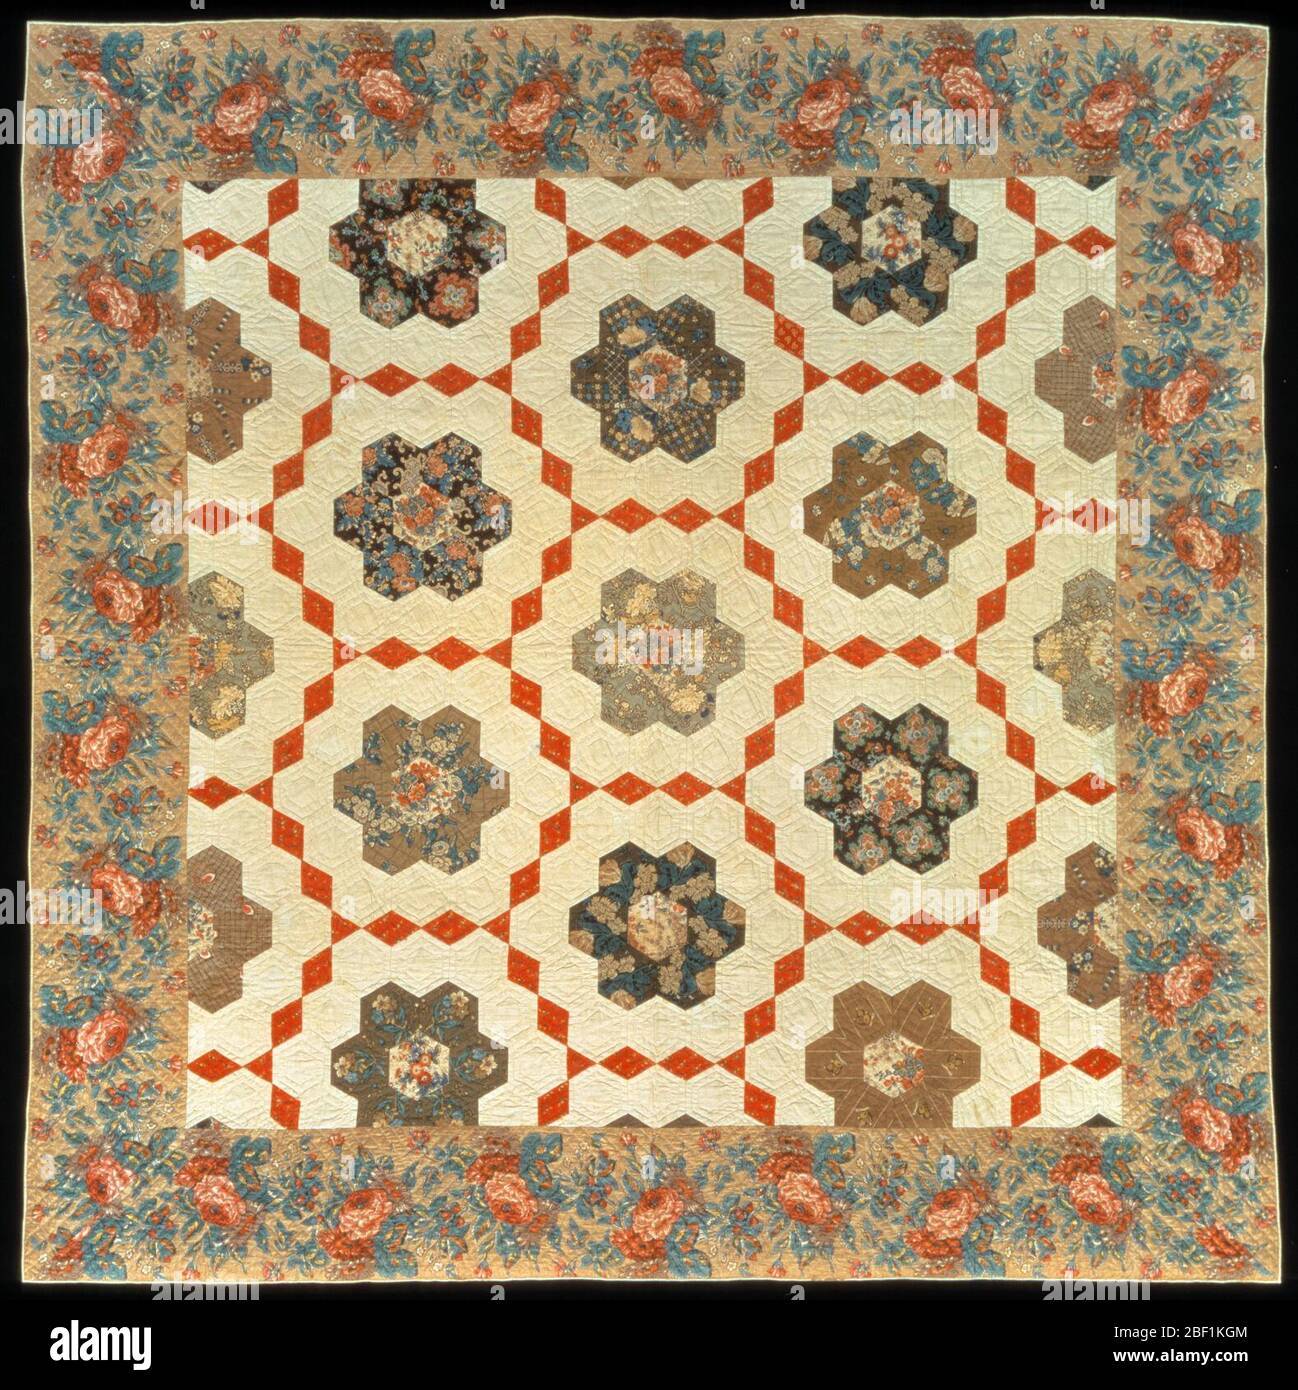 Pieced Quilt Honeycomb. Both Flying Geese and Honeycomb are examples of patterned American quilts made from luxurious samples of calicoes and chintzes imported from France and England. Stock Photo